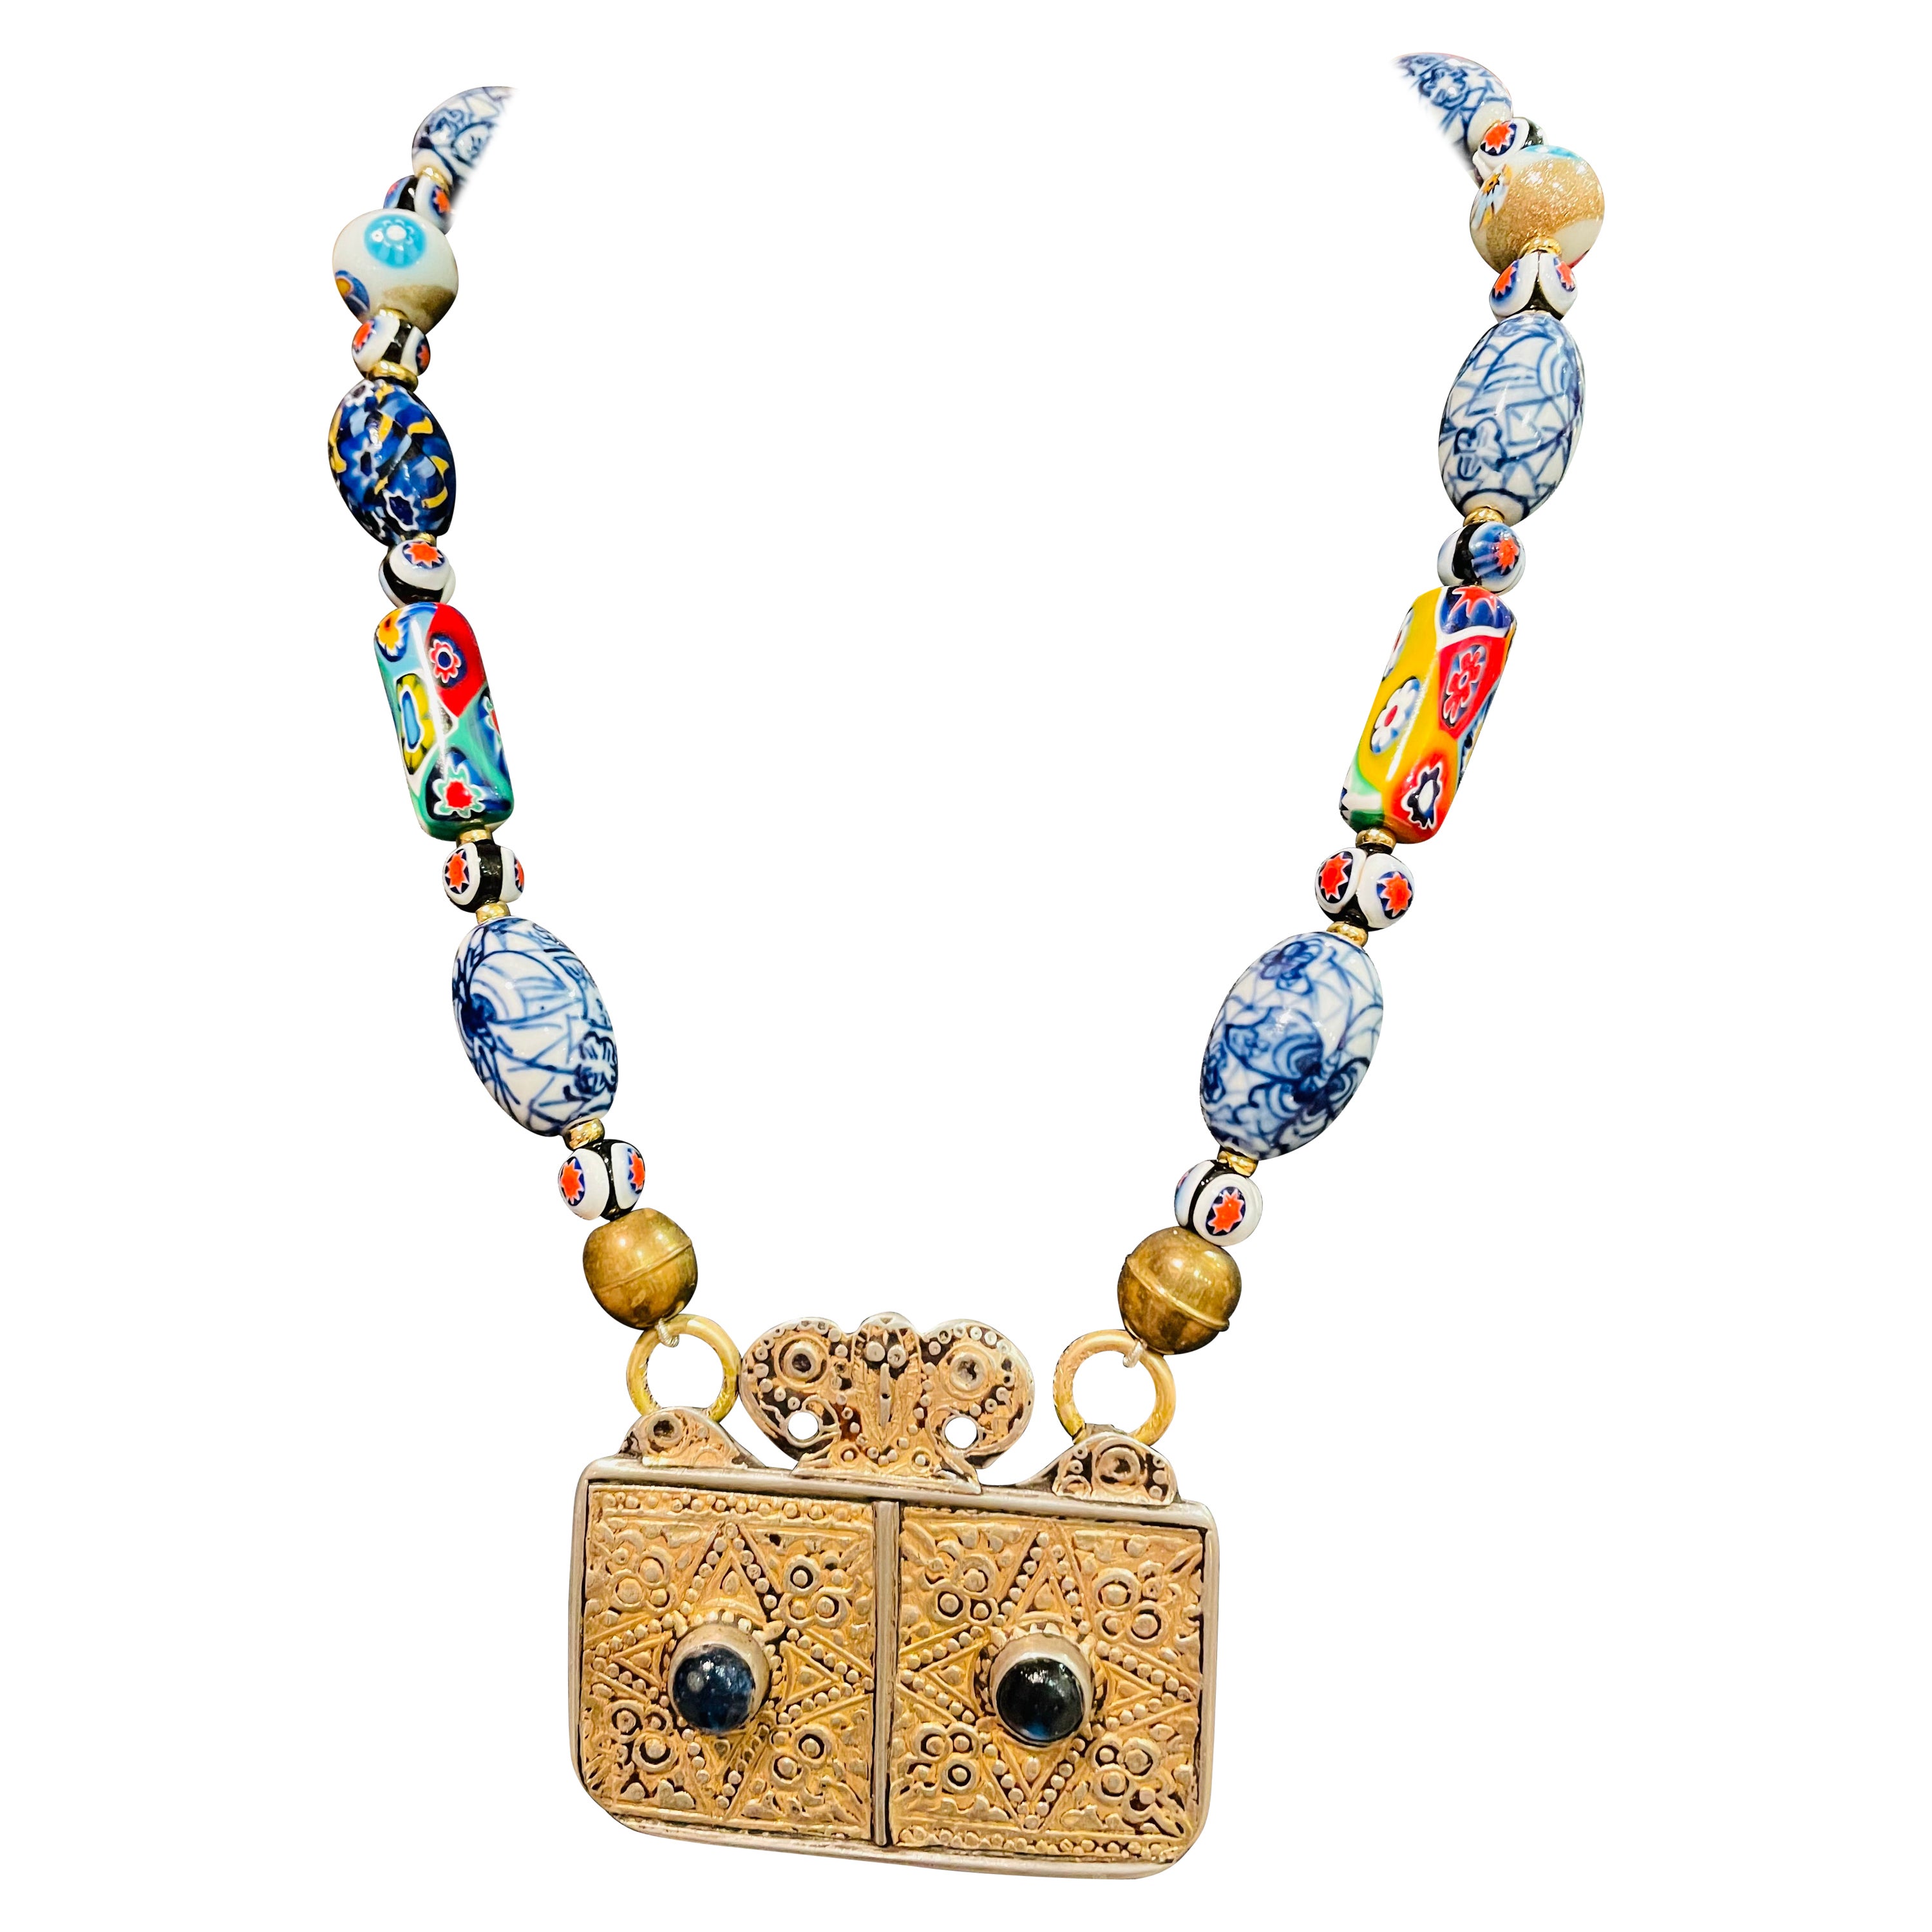 LB offers Antique Sterling Silver, Lapis, Tibetan pendant, Murano glass necklace For Sale